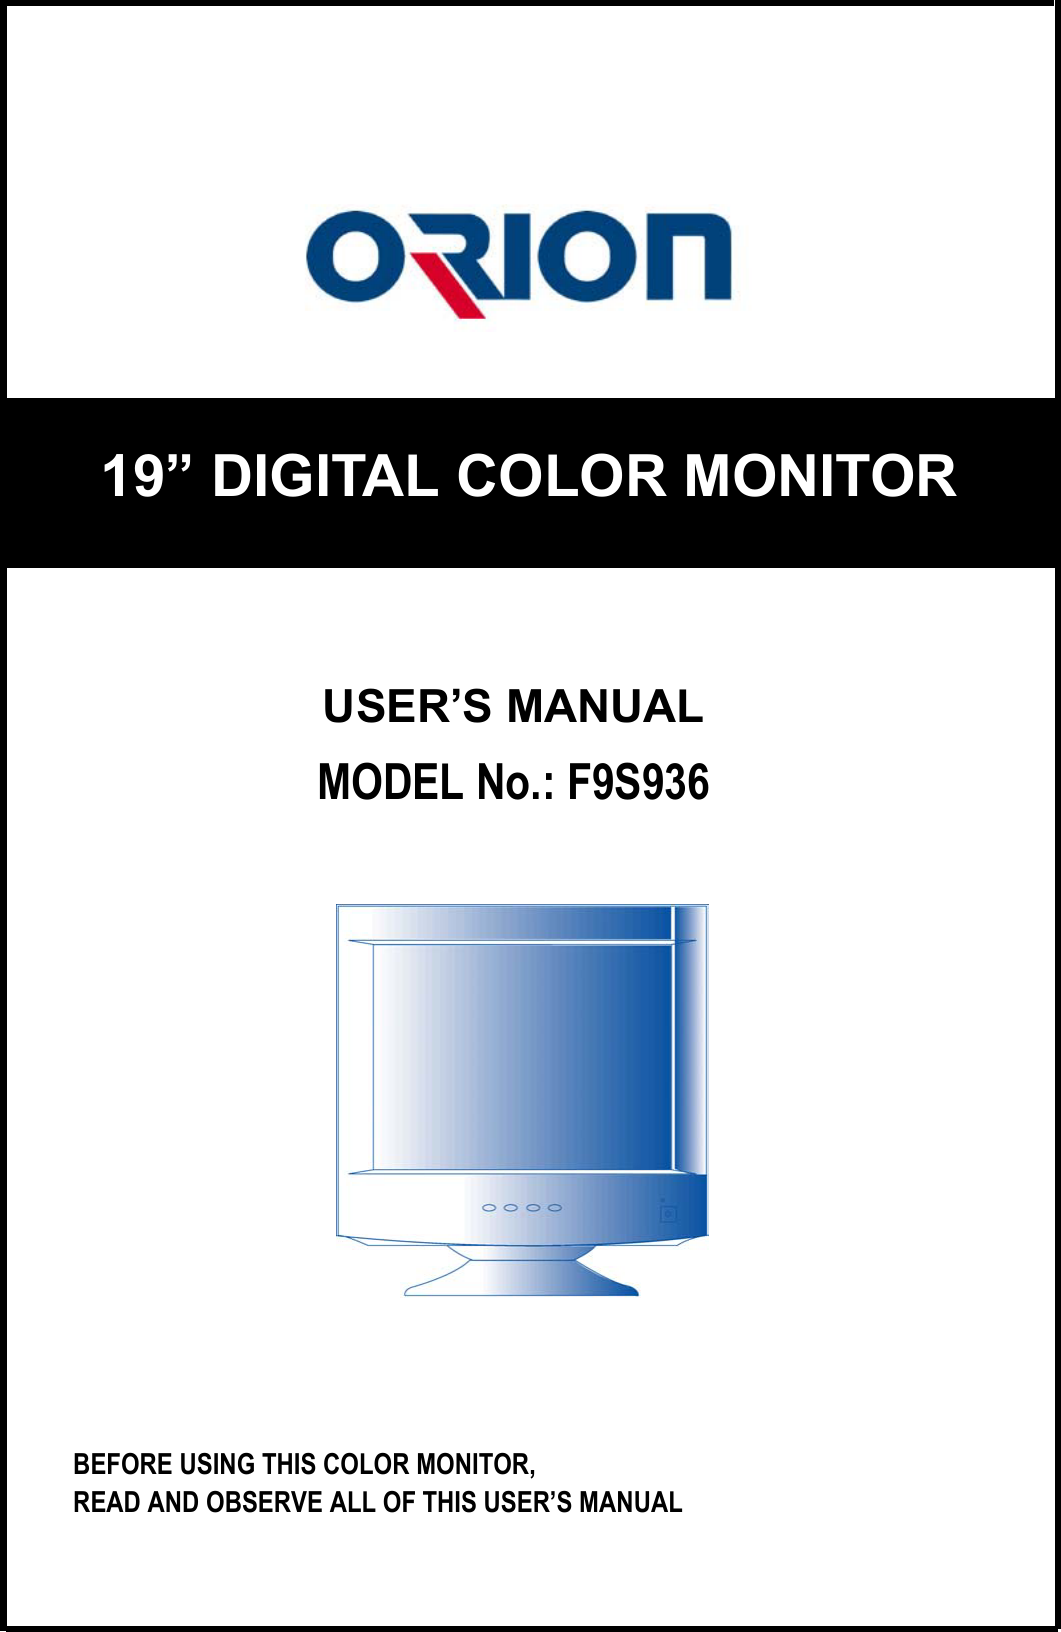 USER’S MANUALMODEL No.: F9S936BEFORE USING THIS COLOR MONITOR,READ AND OBSERVE ALL OF THIS USER’S MANUAL19” DIGITAL COLOR MONITOR